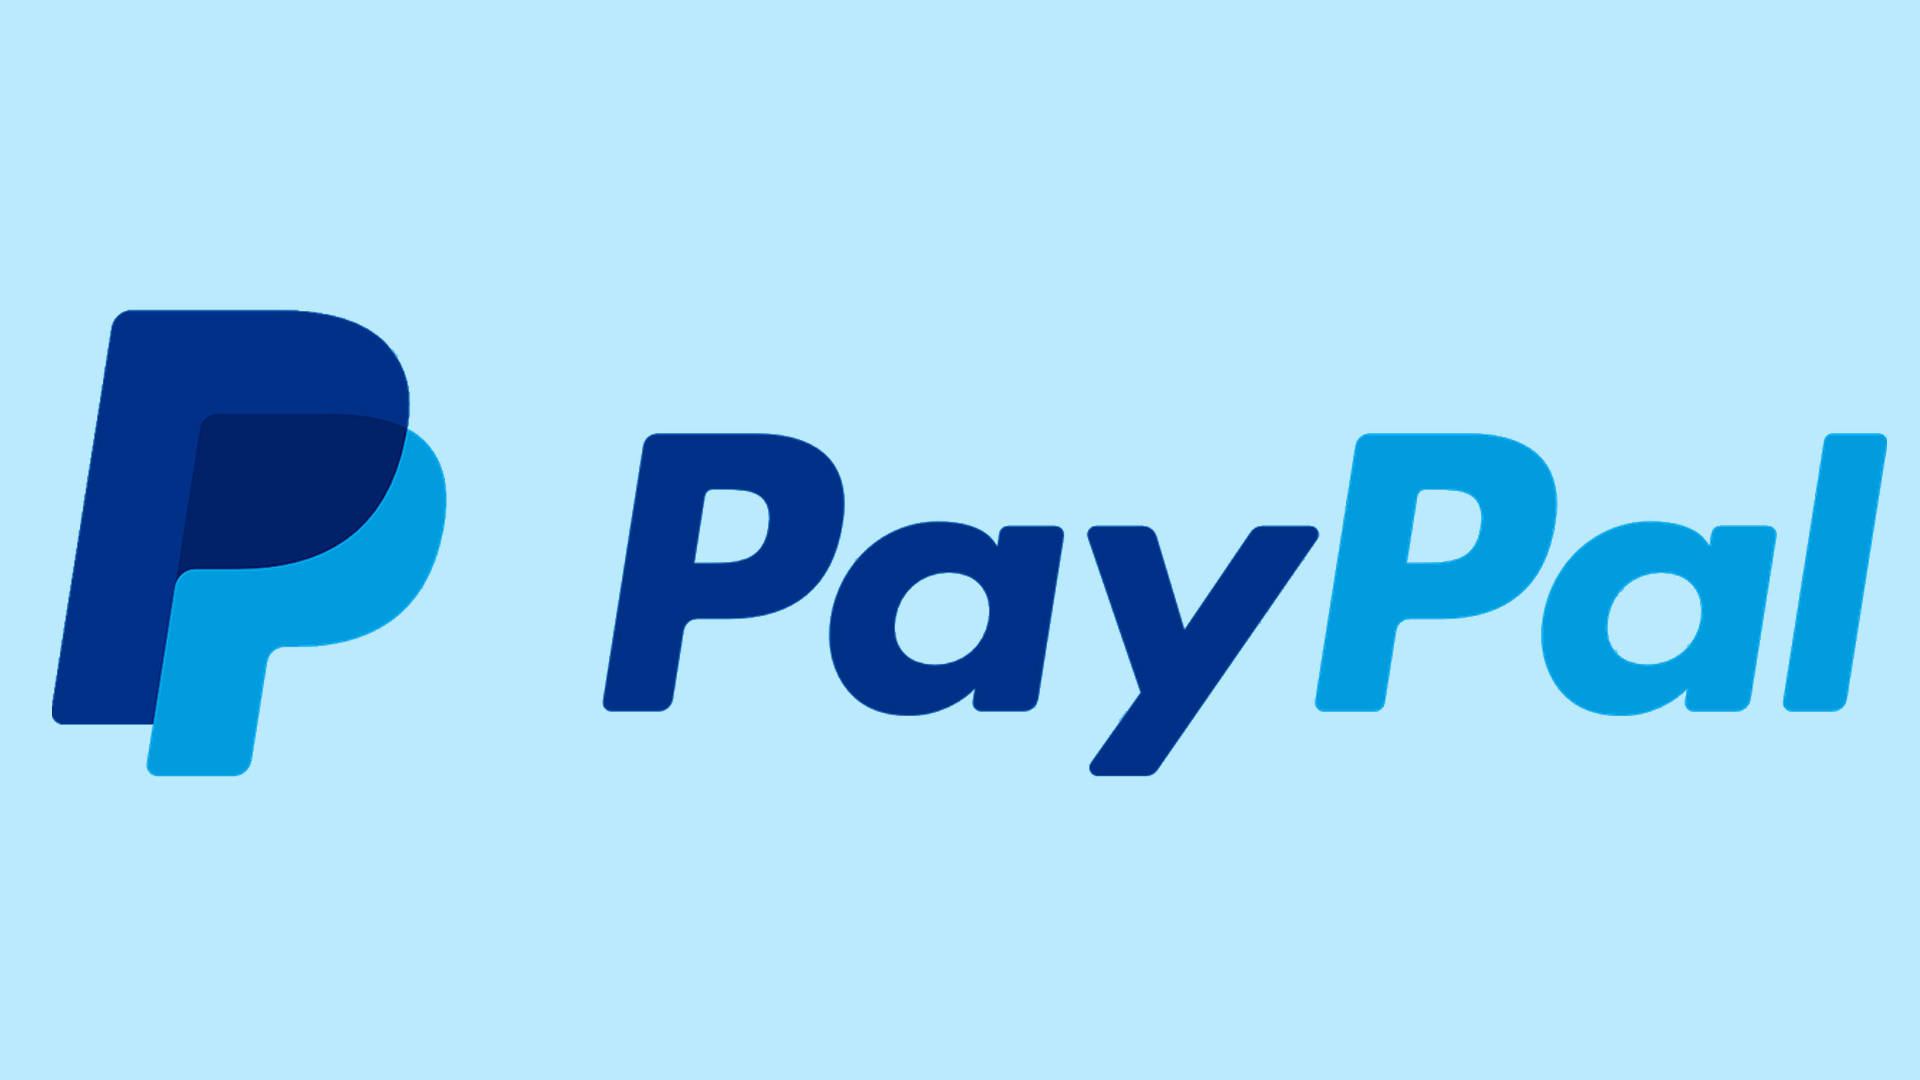 Paypal Light Blue Background Background